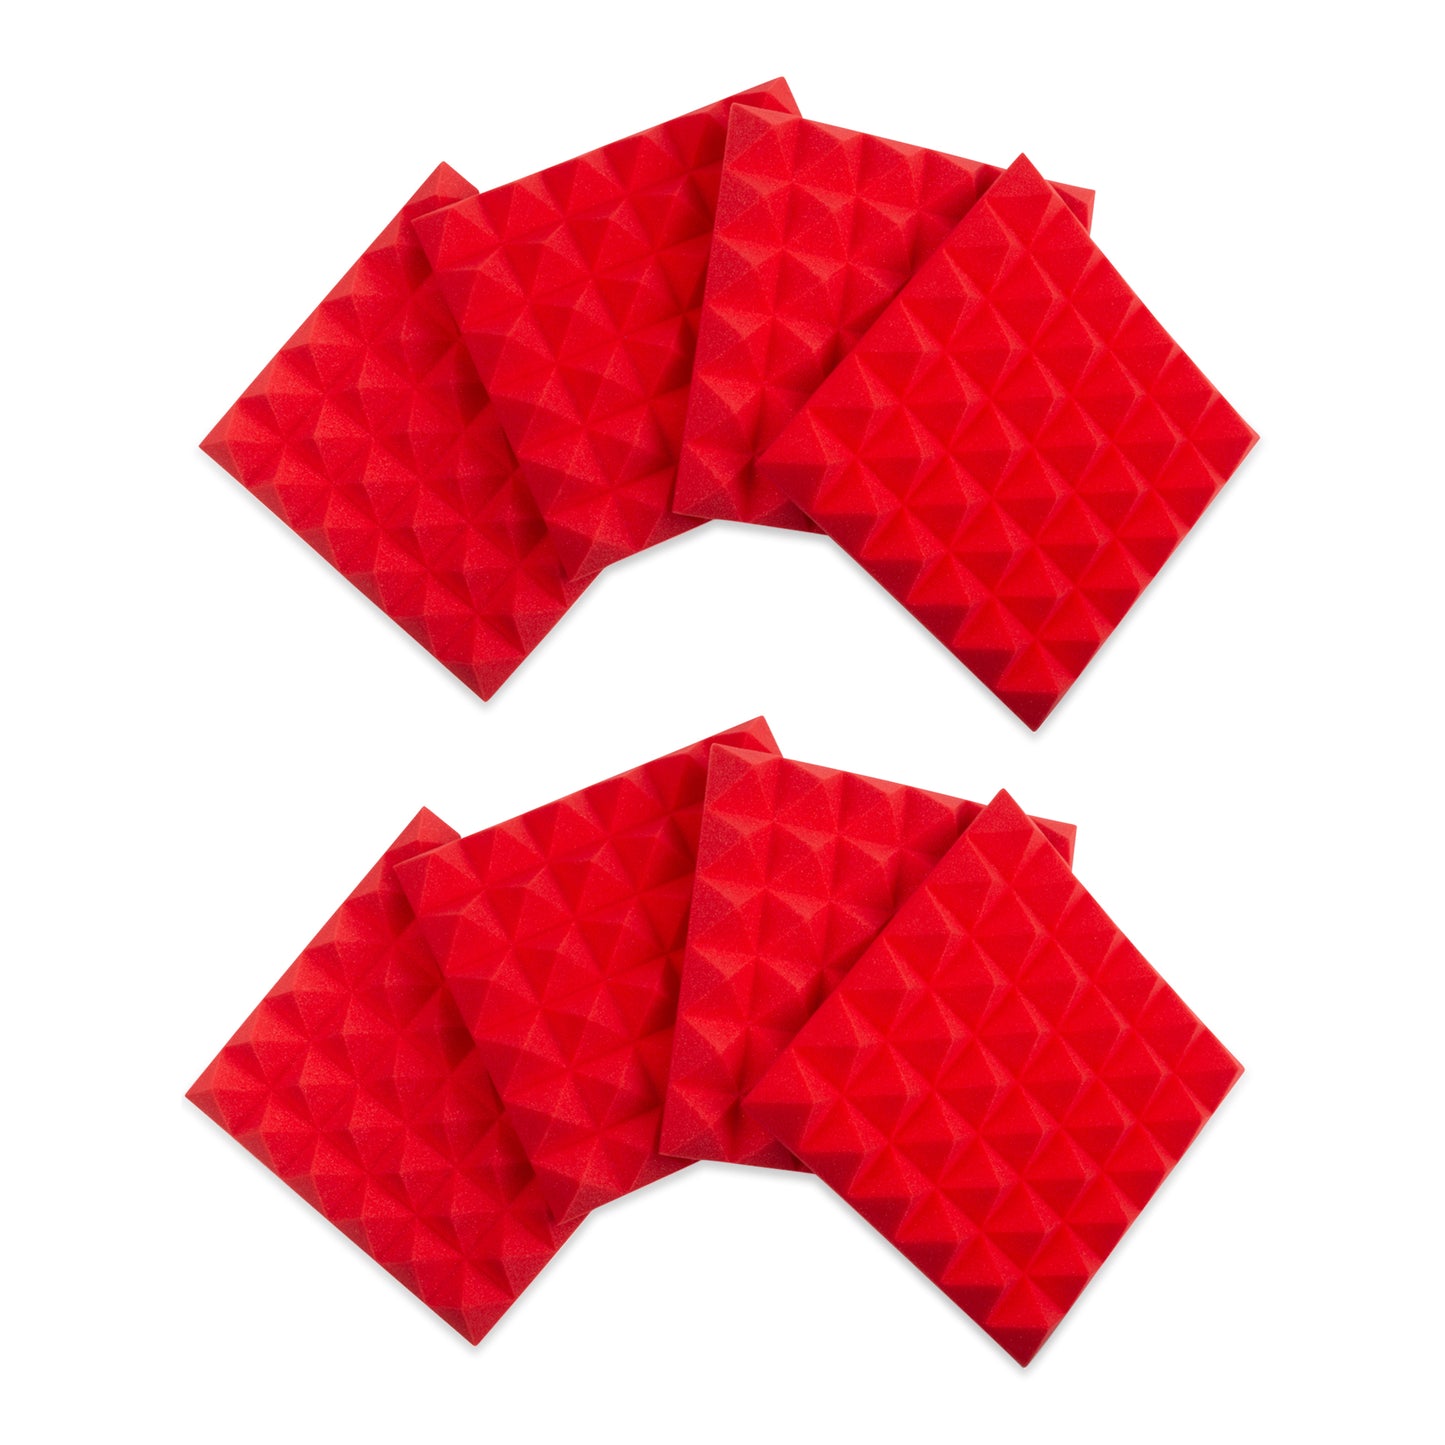 GFW-ACPNL1212PRED-8PK - 8 Pack of Red 12x12" Acoustic Pyramid Panel